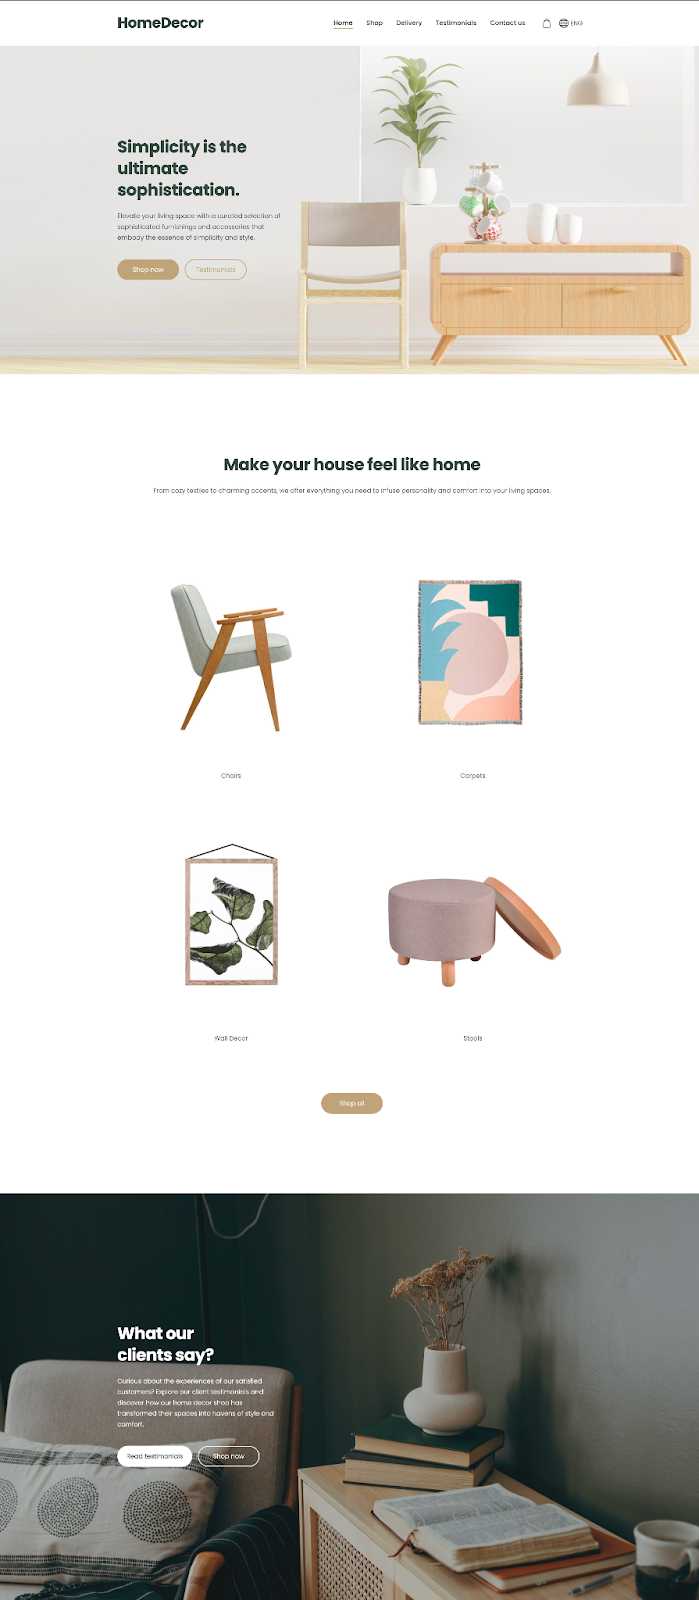 Template for a website with an online store by Mozello.